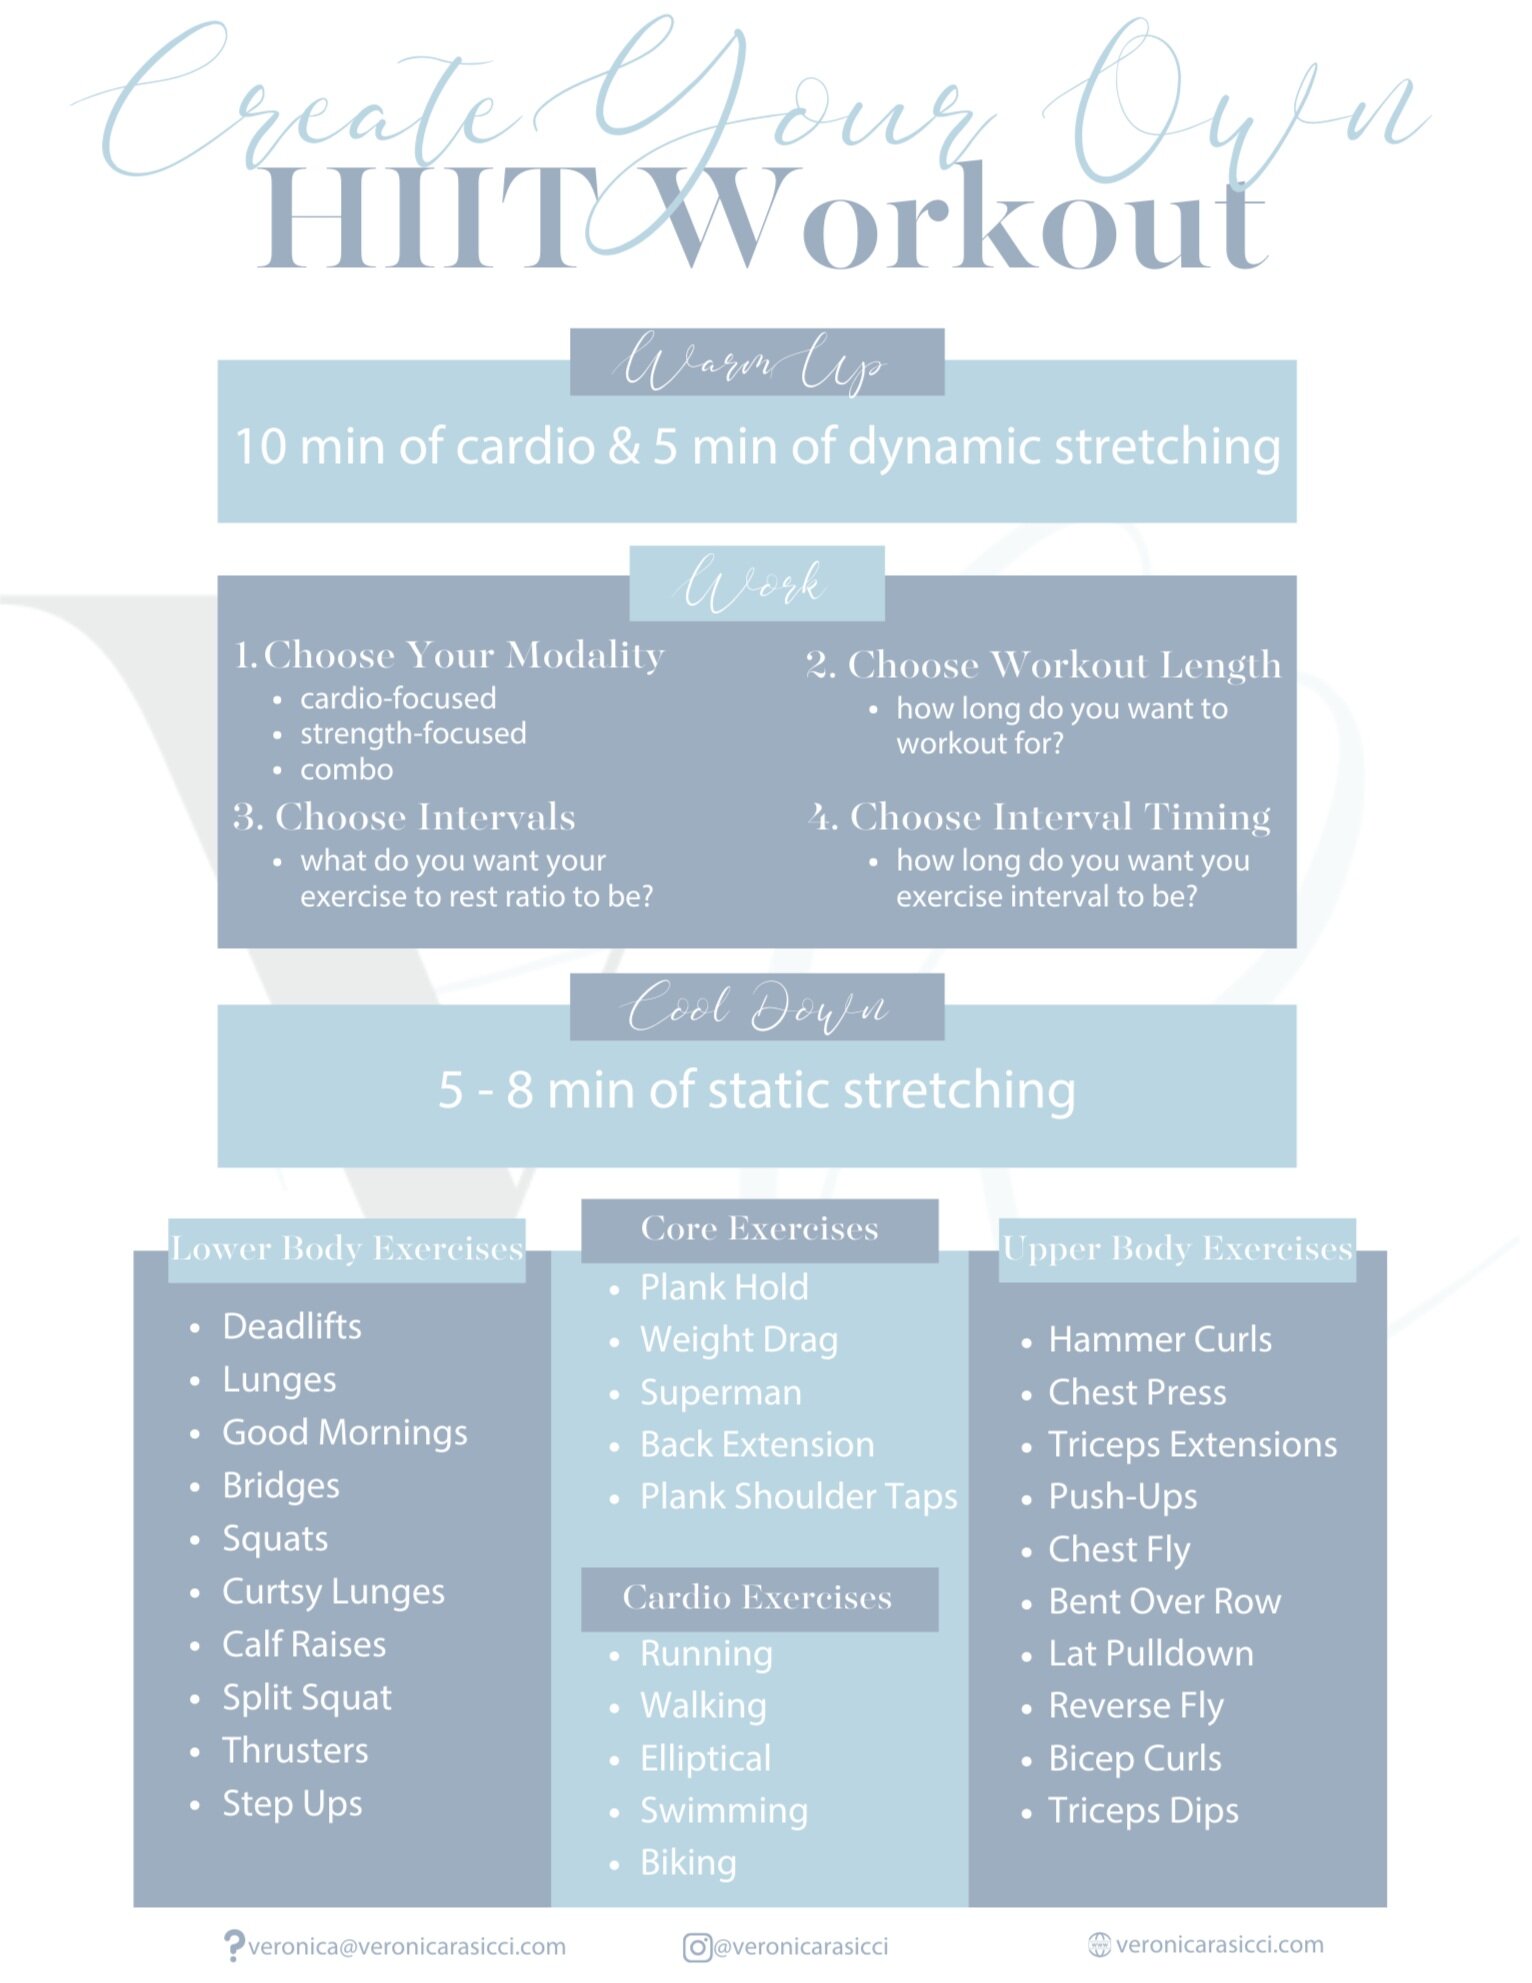 How To Create Your Own HIIT (high intensity interval training) Workout